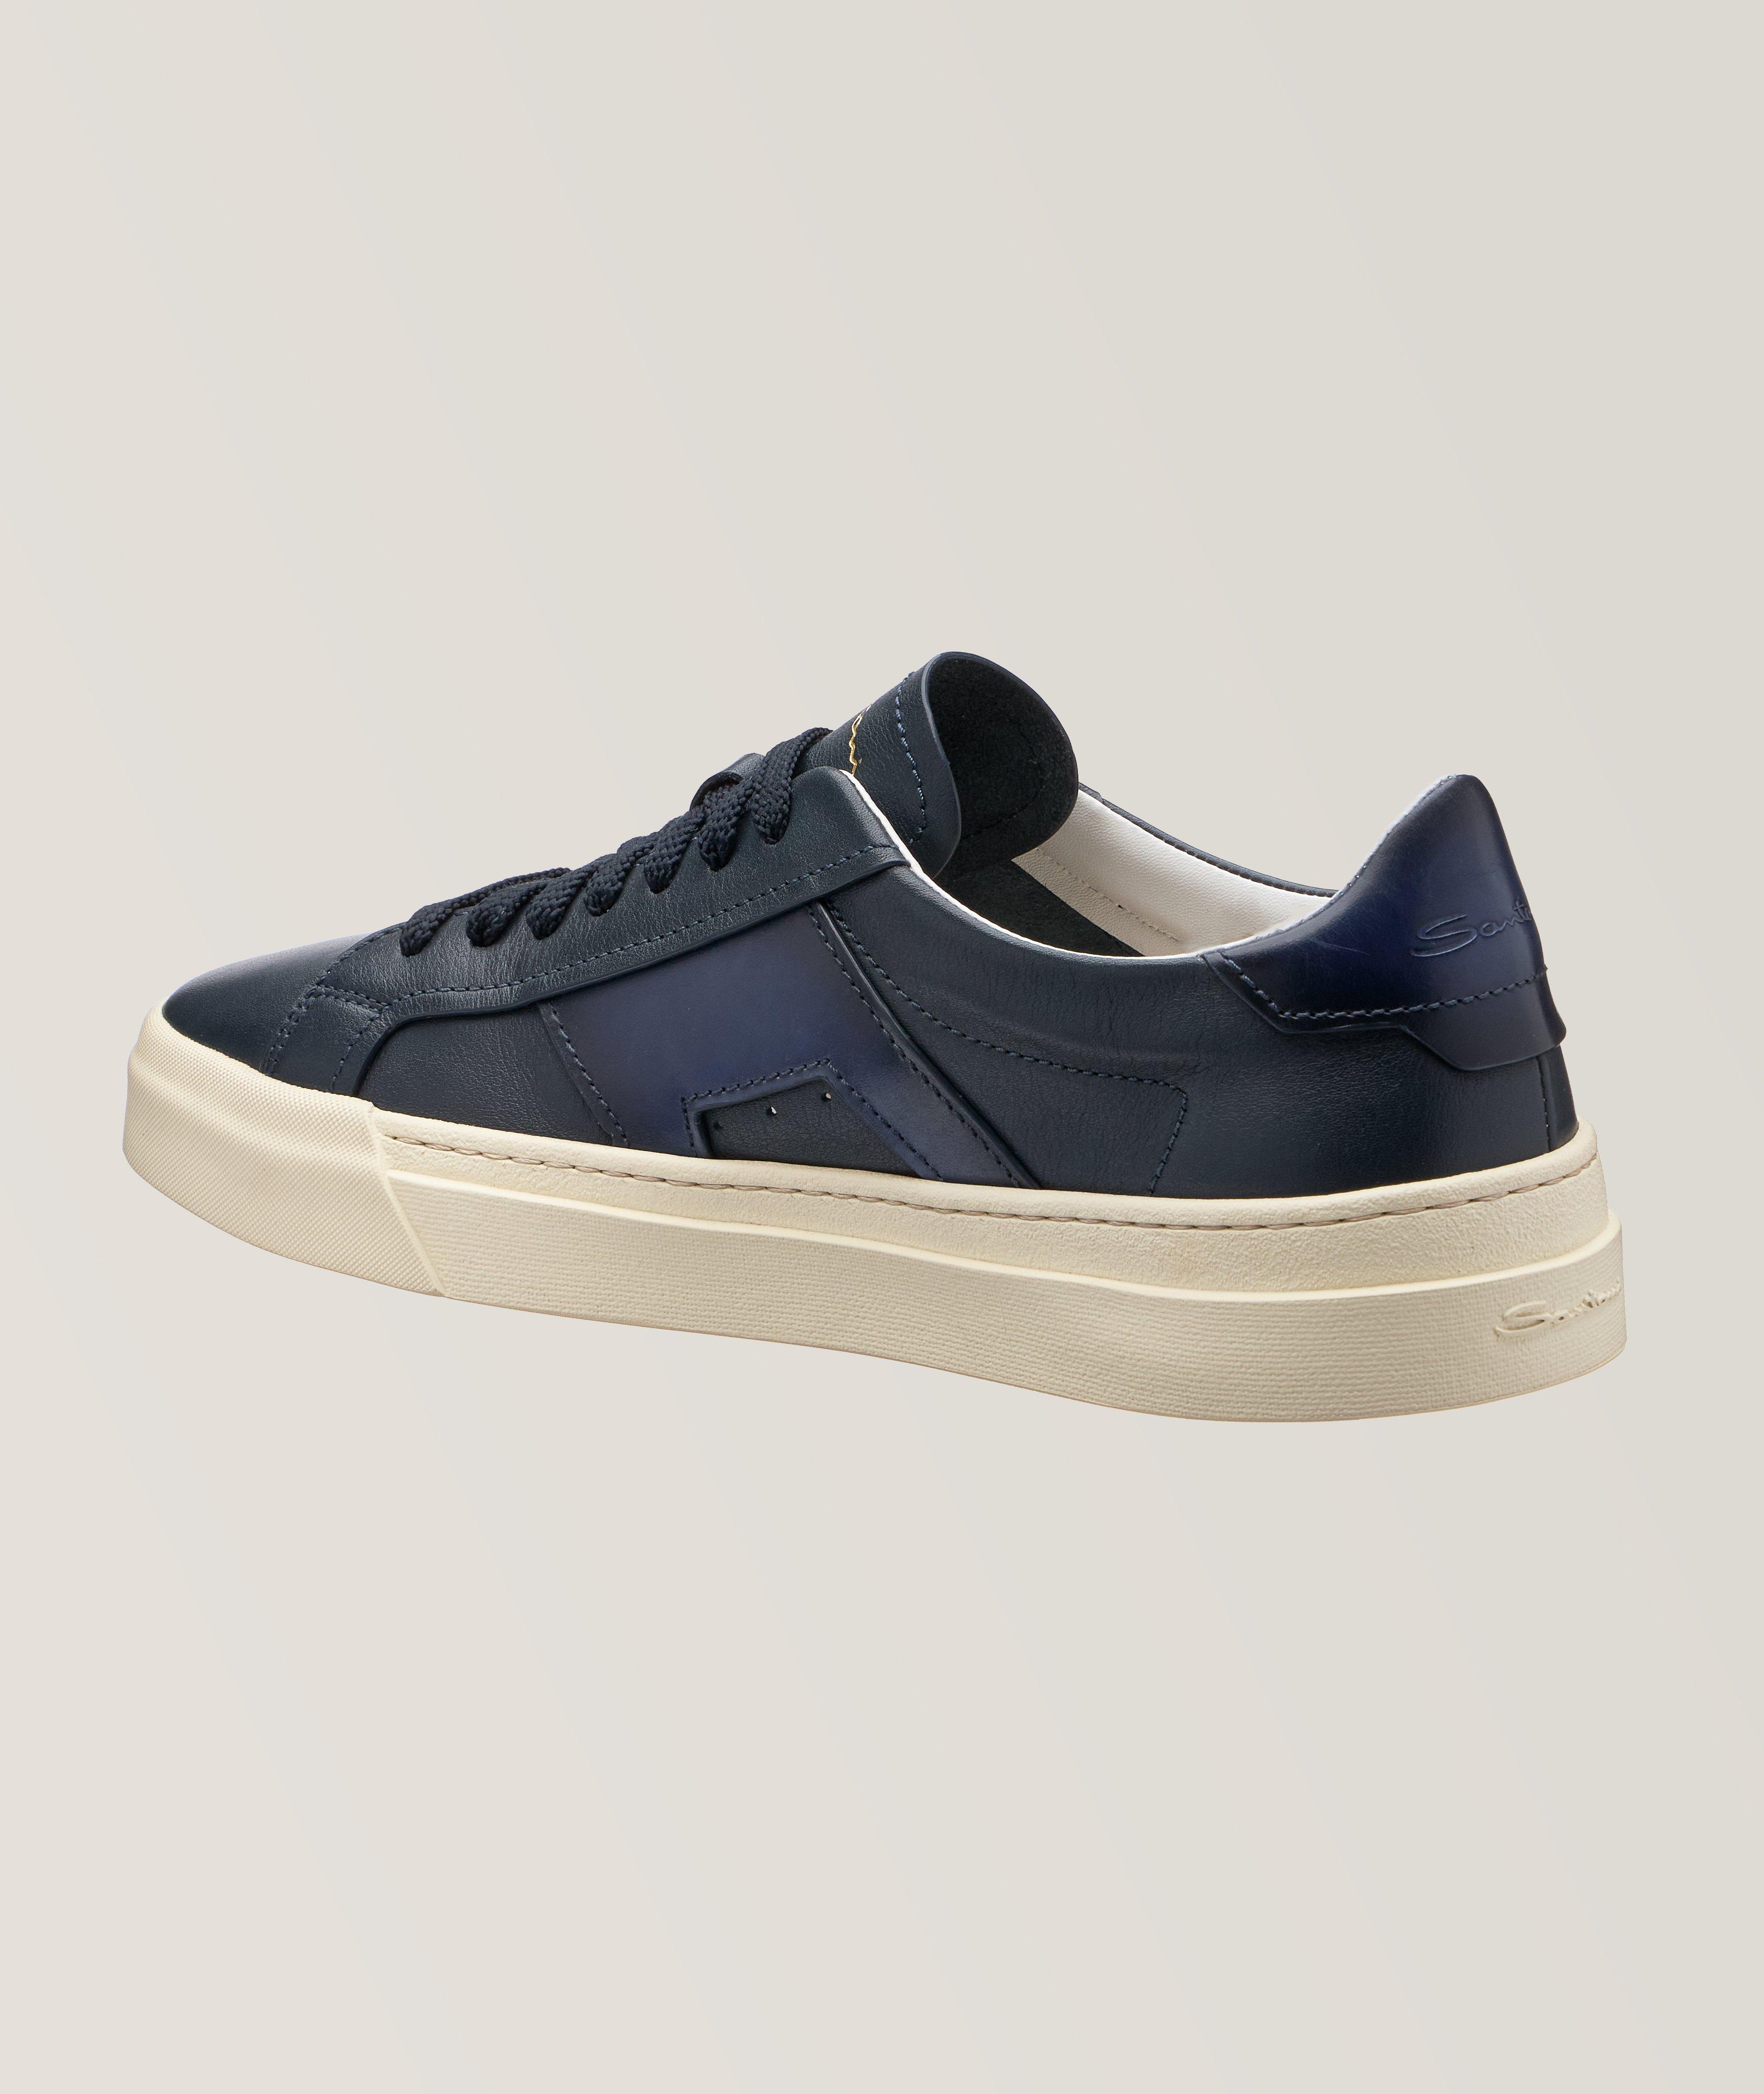 DBS3 Tonal Burnished Leather Sneakers